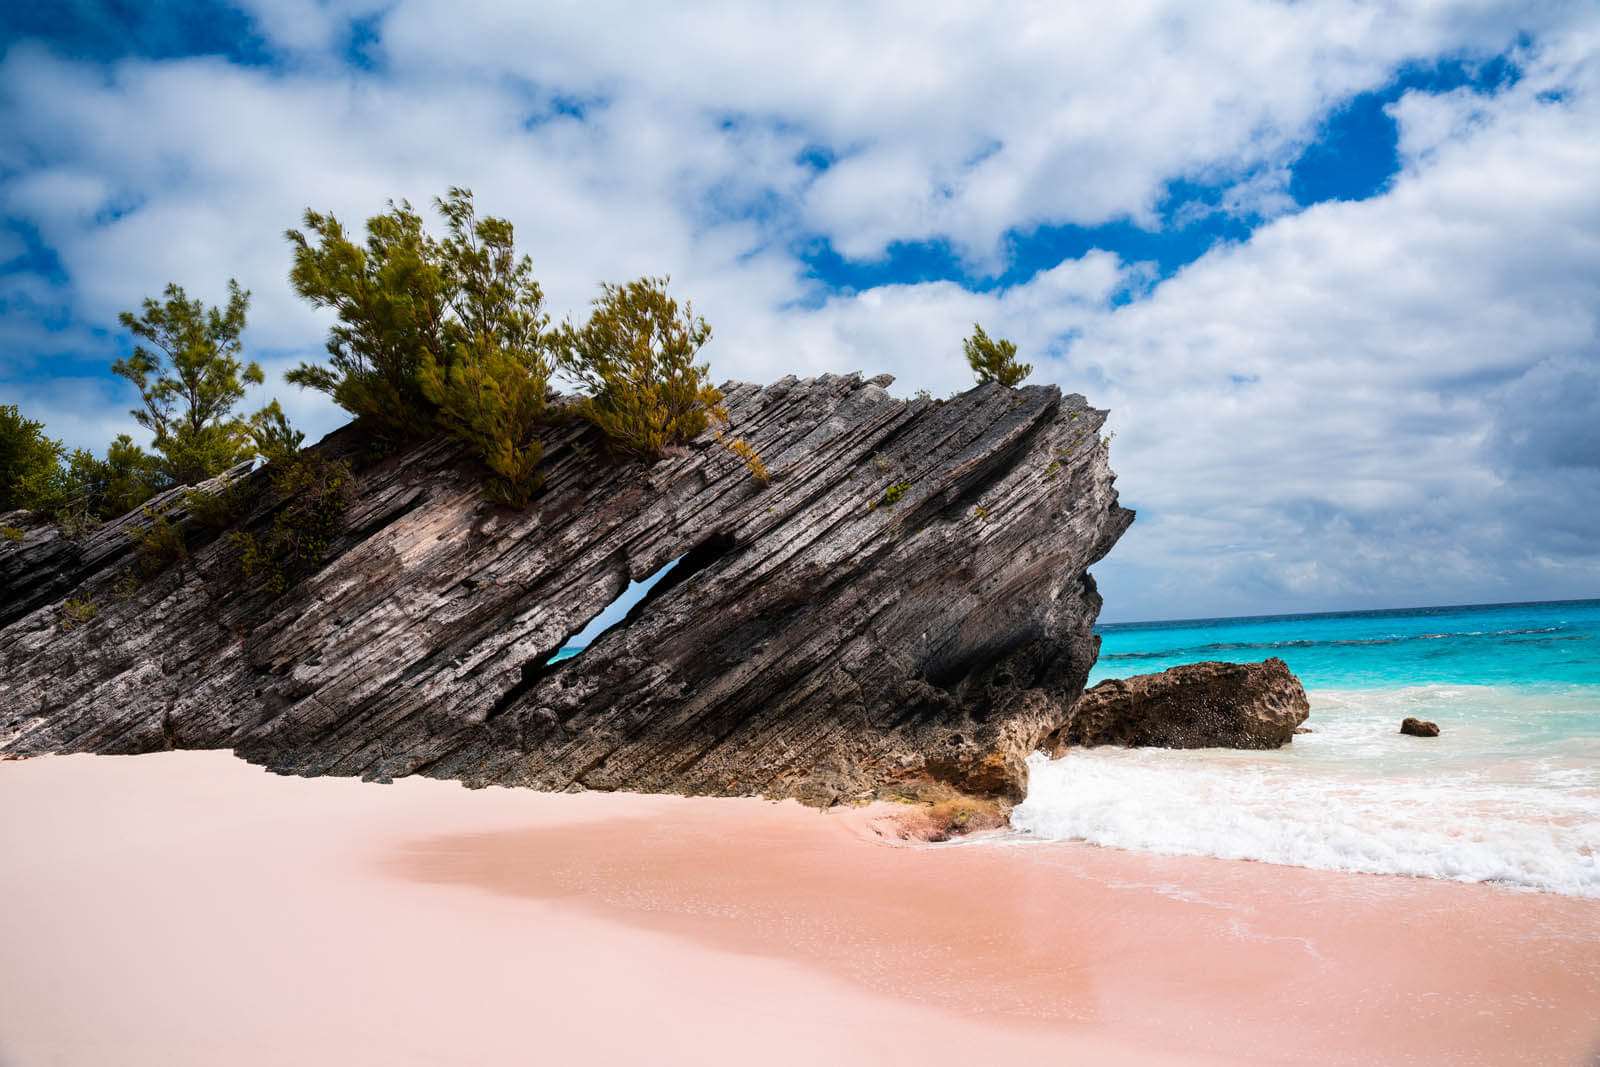 8 things to do on your first trip to Bermuda - Bermuda travel guide